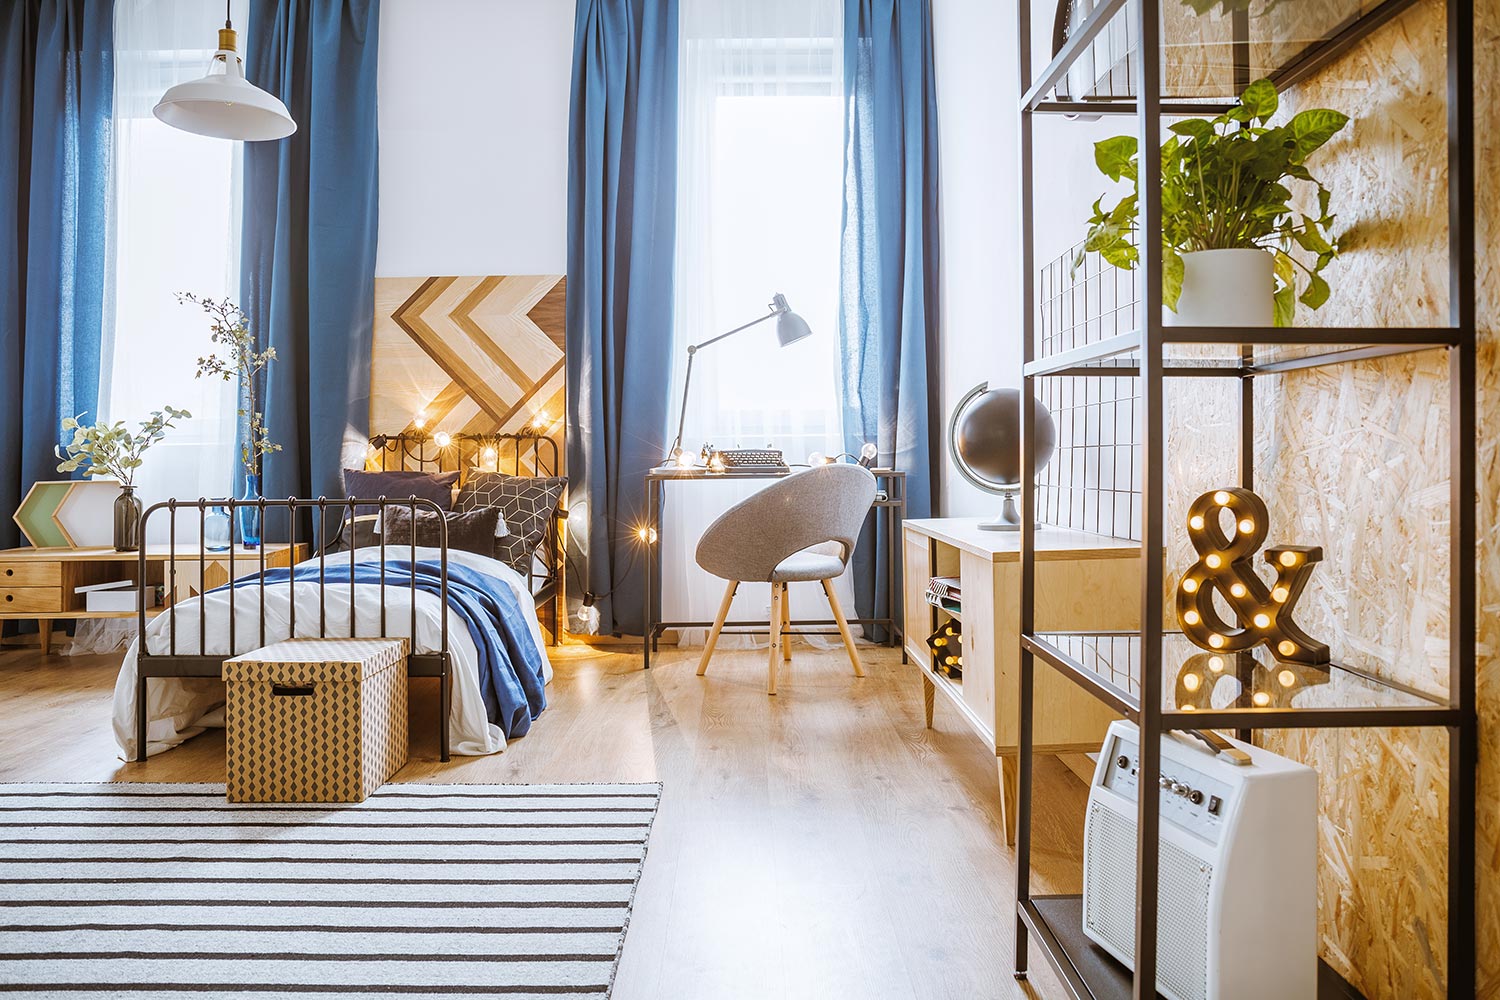 Interior bedroom for teenager with modern designed chair,blue elements and plants